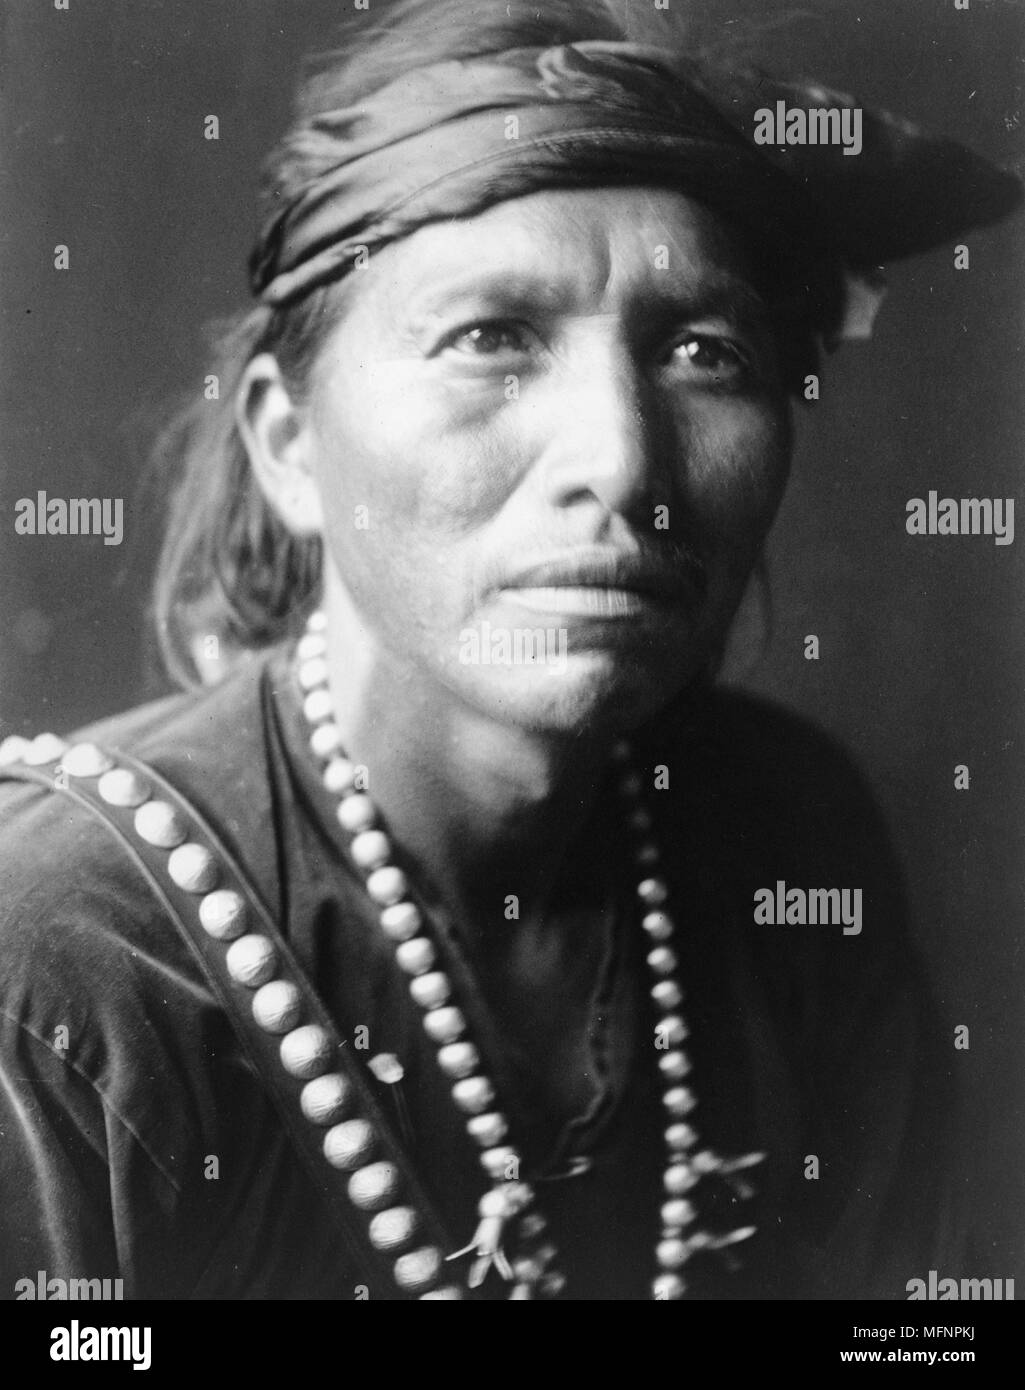 Head-and-shoulders portrait of Navajo man, facing slightly right, wearing headband and silver squash blossom necklace.1906. Photograph by Edward Curtis (1868-1952). Stock Photo